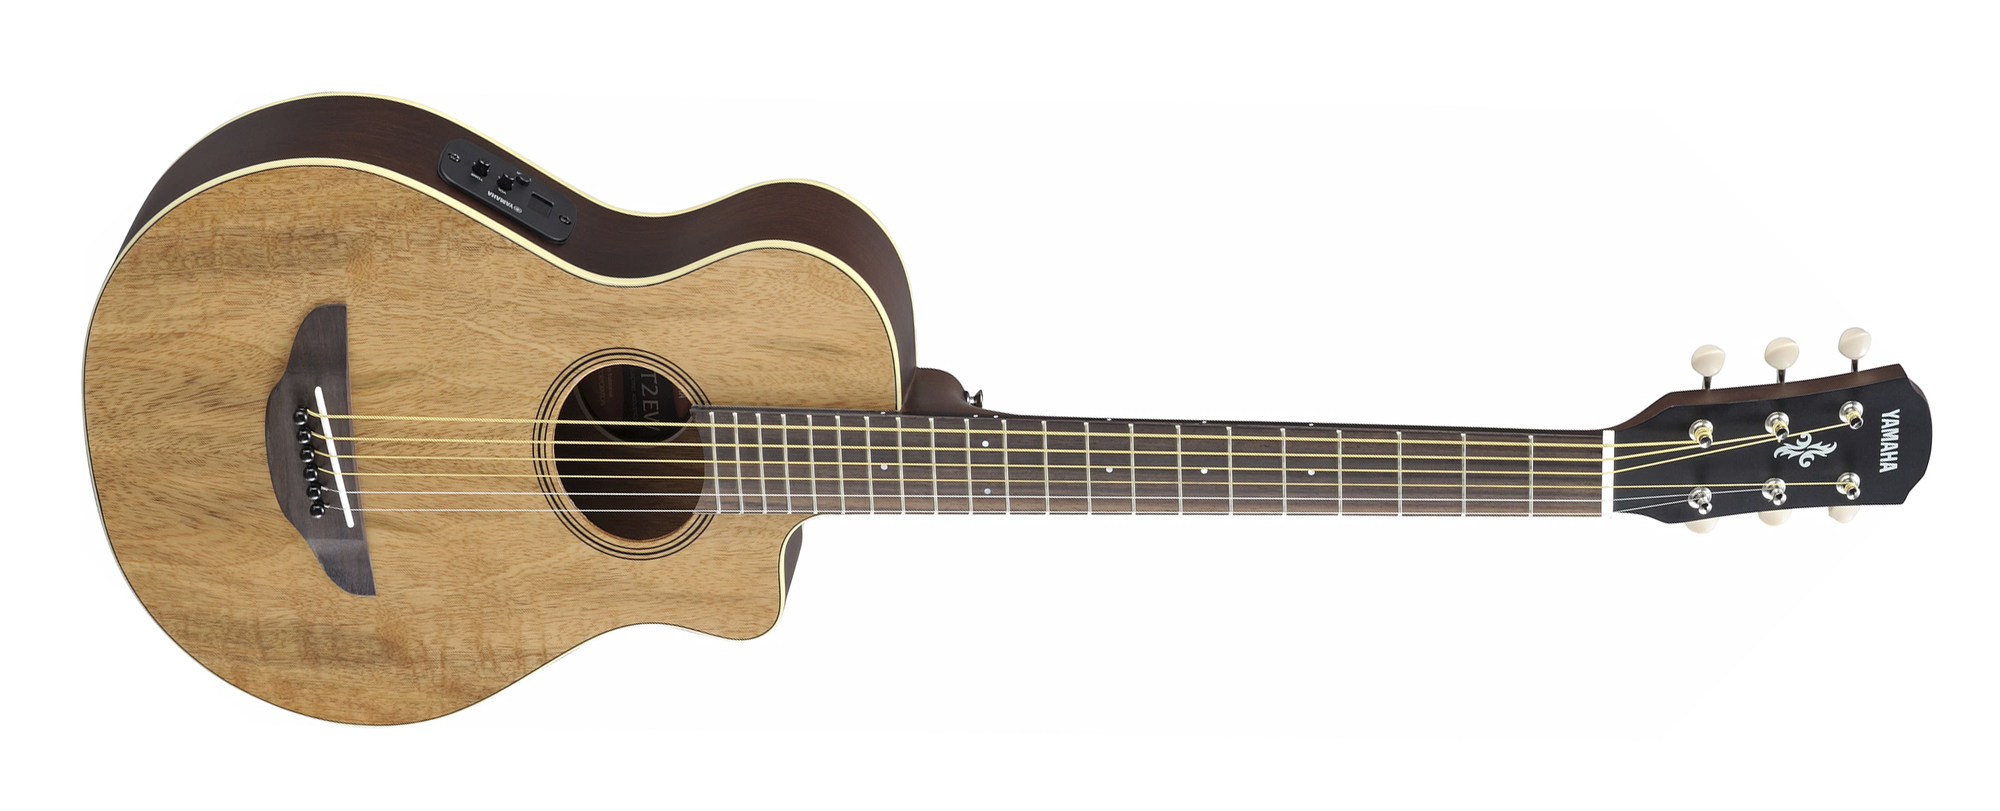 Yamaha APXT2EW APXT Series 3/4 Size Exotic Wood Natural 6 String RH Acoustic Electric Guitar with Gigbag